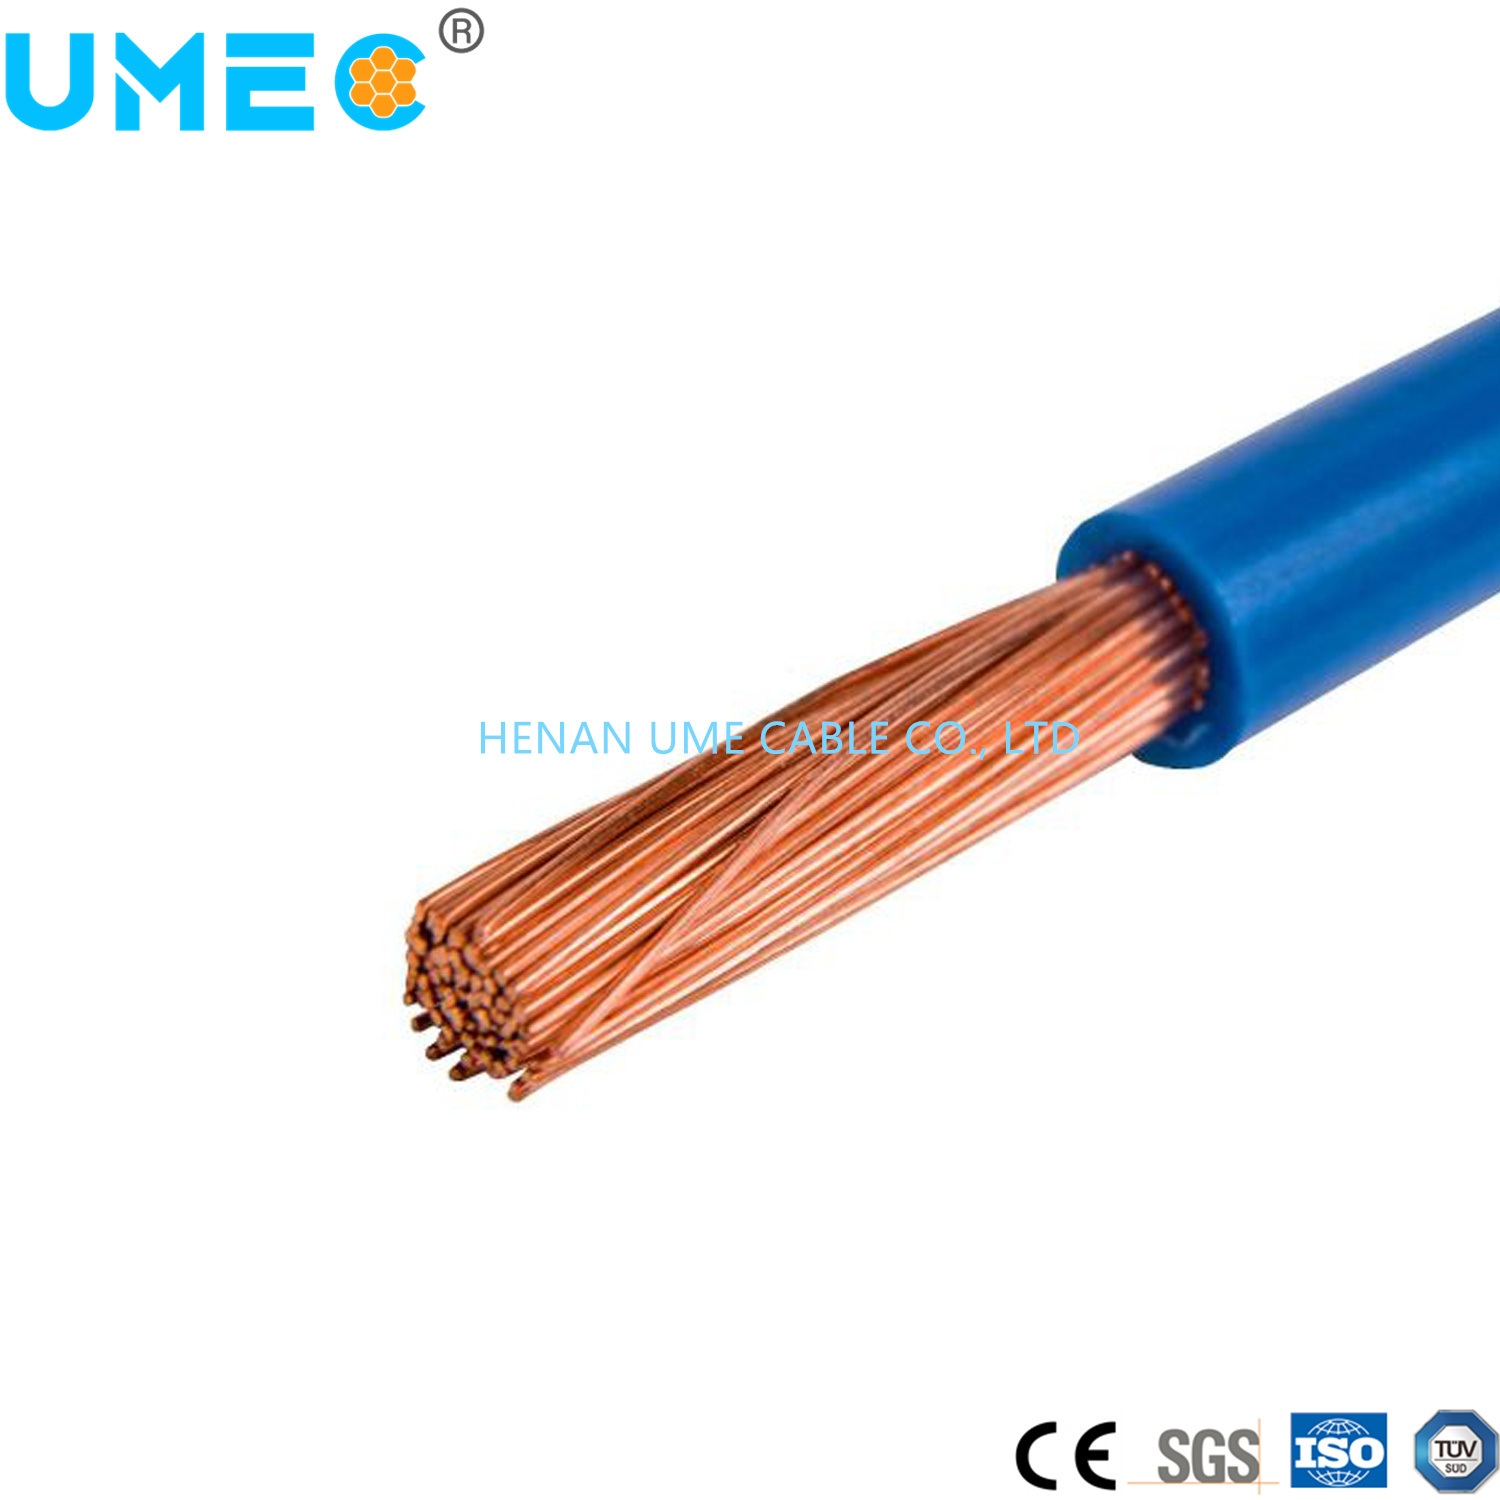 Secondary Industrial Wire Fire Resistance PVC Insulation Electrical Building Wire Tw/Thw Wire